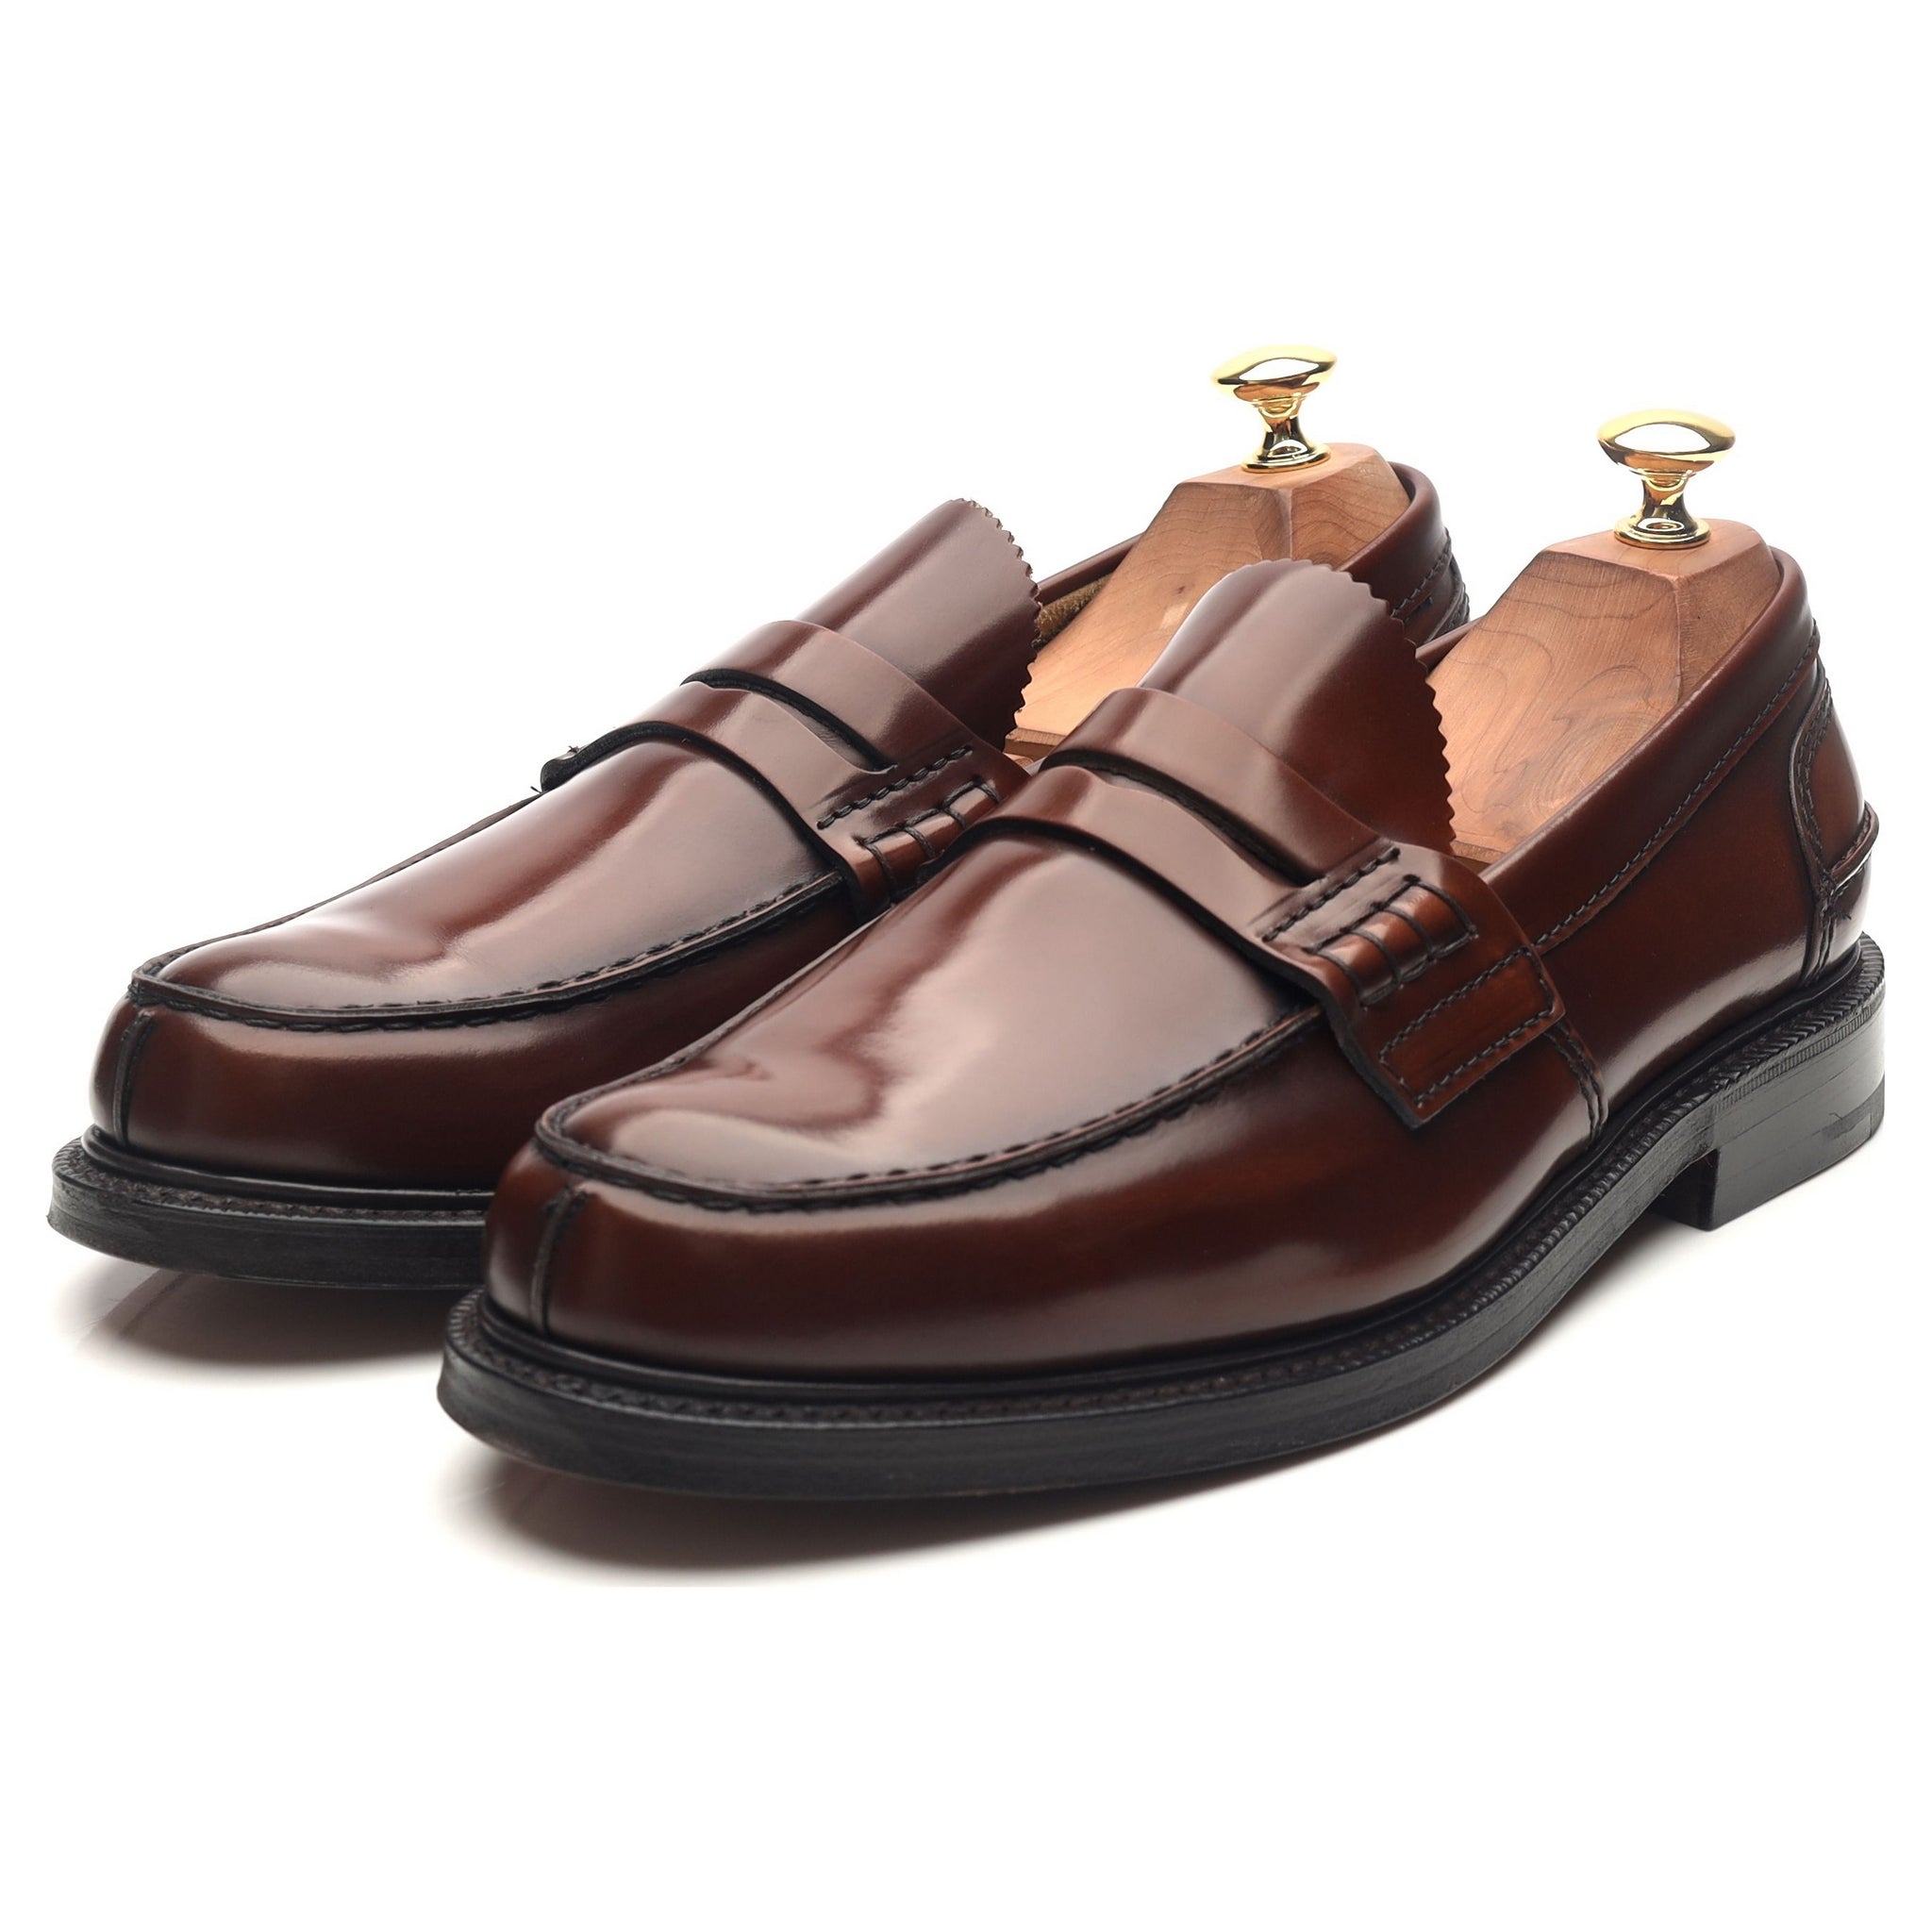 Willenhall' Brown Leather Loafers UK 9 G - Abbot's Shoes